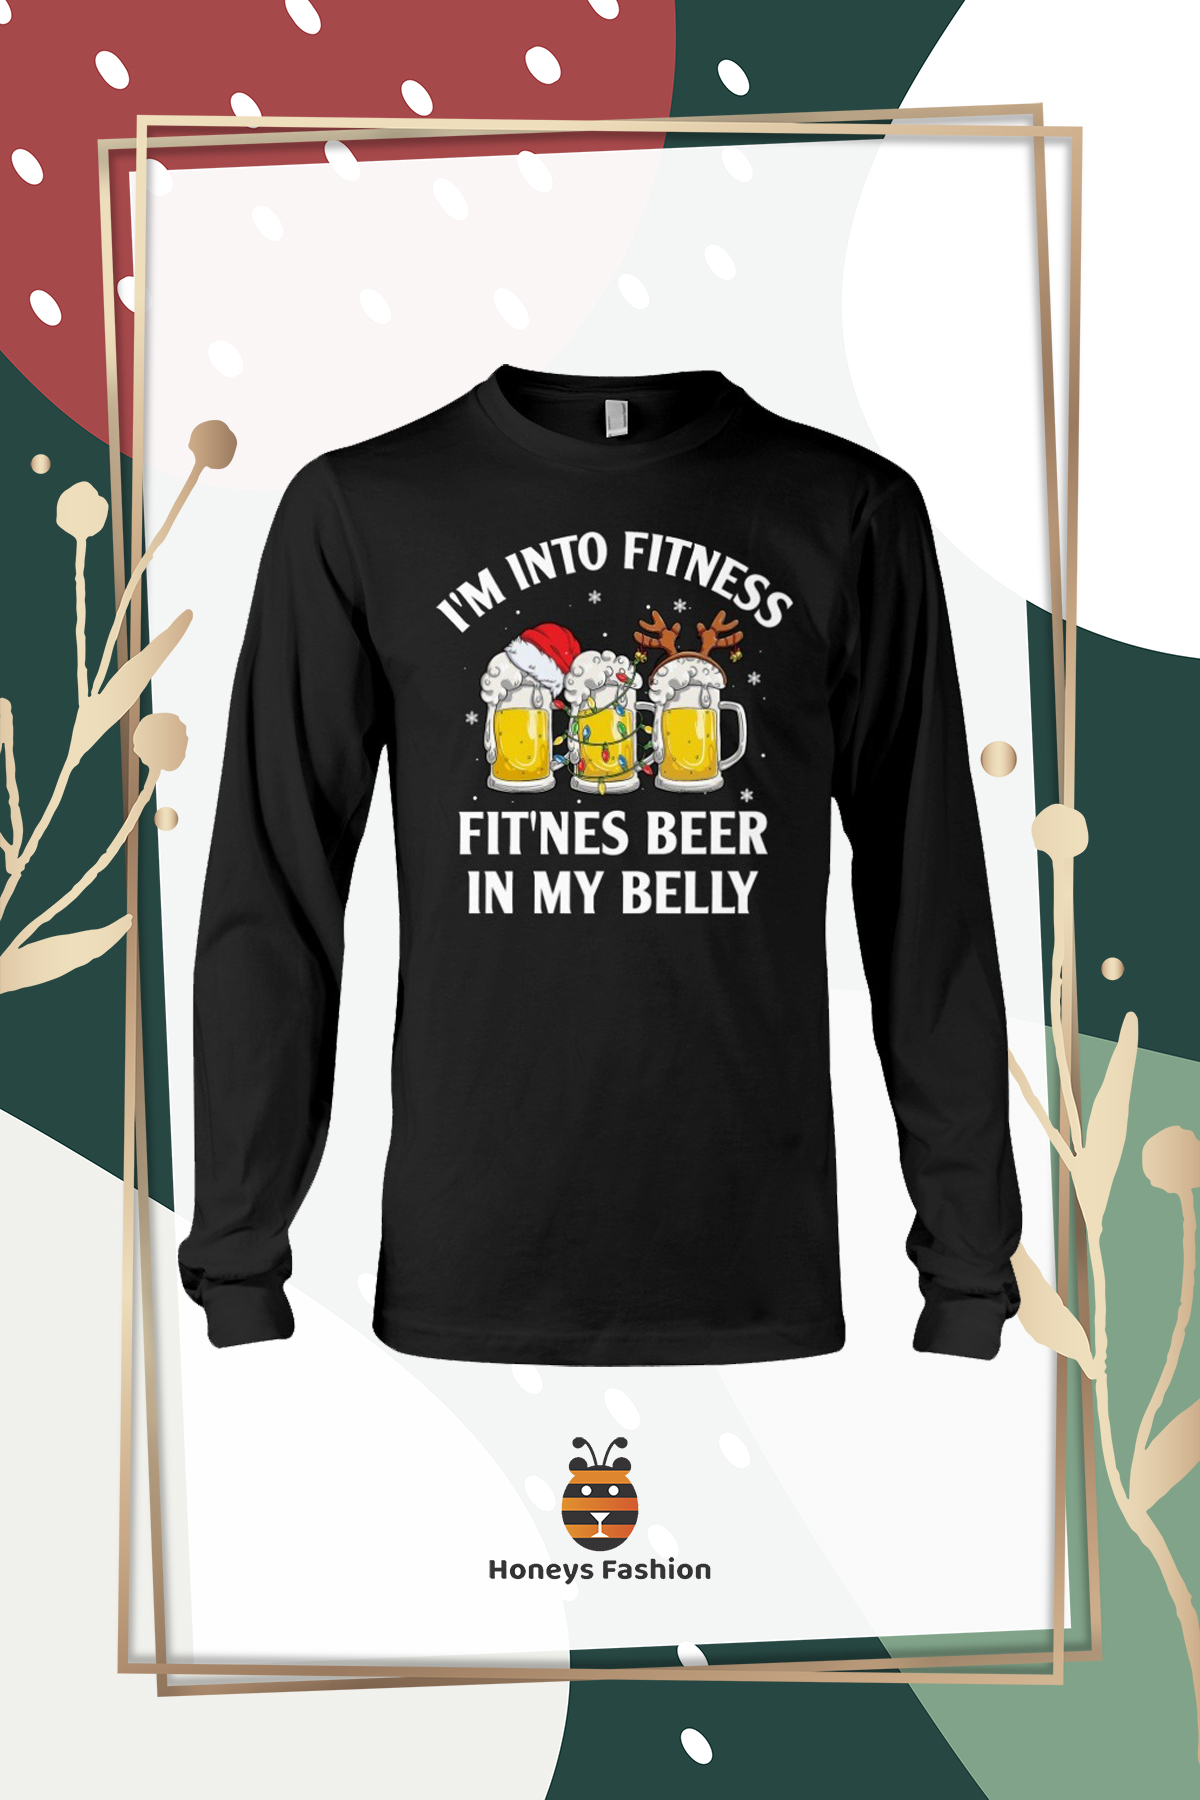 I'm Into Fitness Fit'nes Beer In My Belly Hoodie Shirt